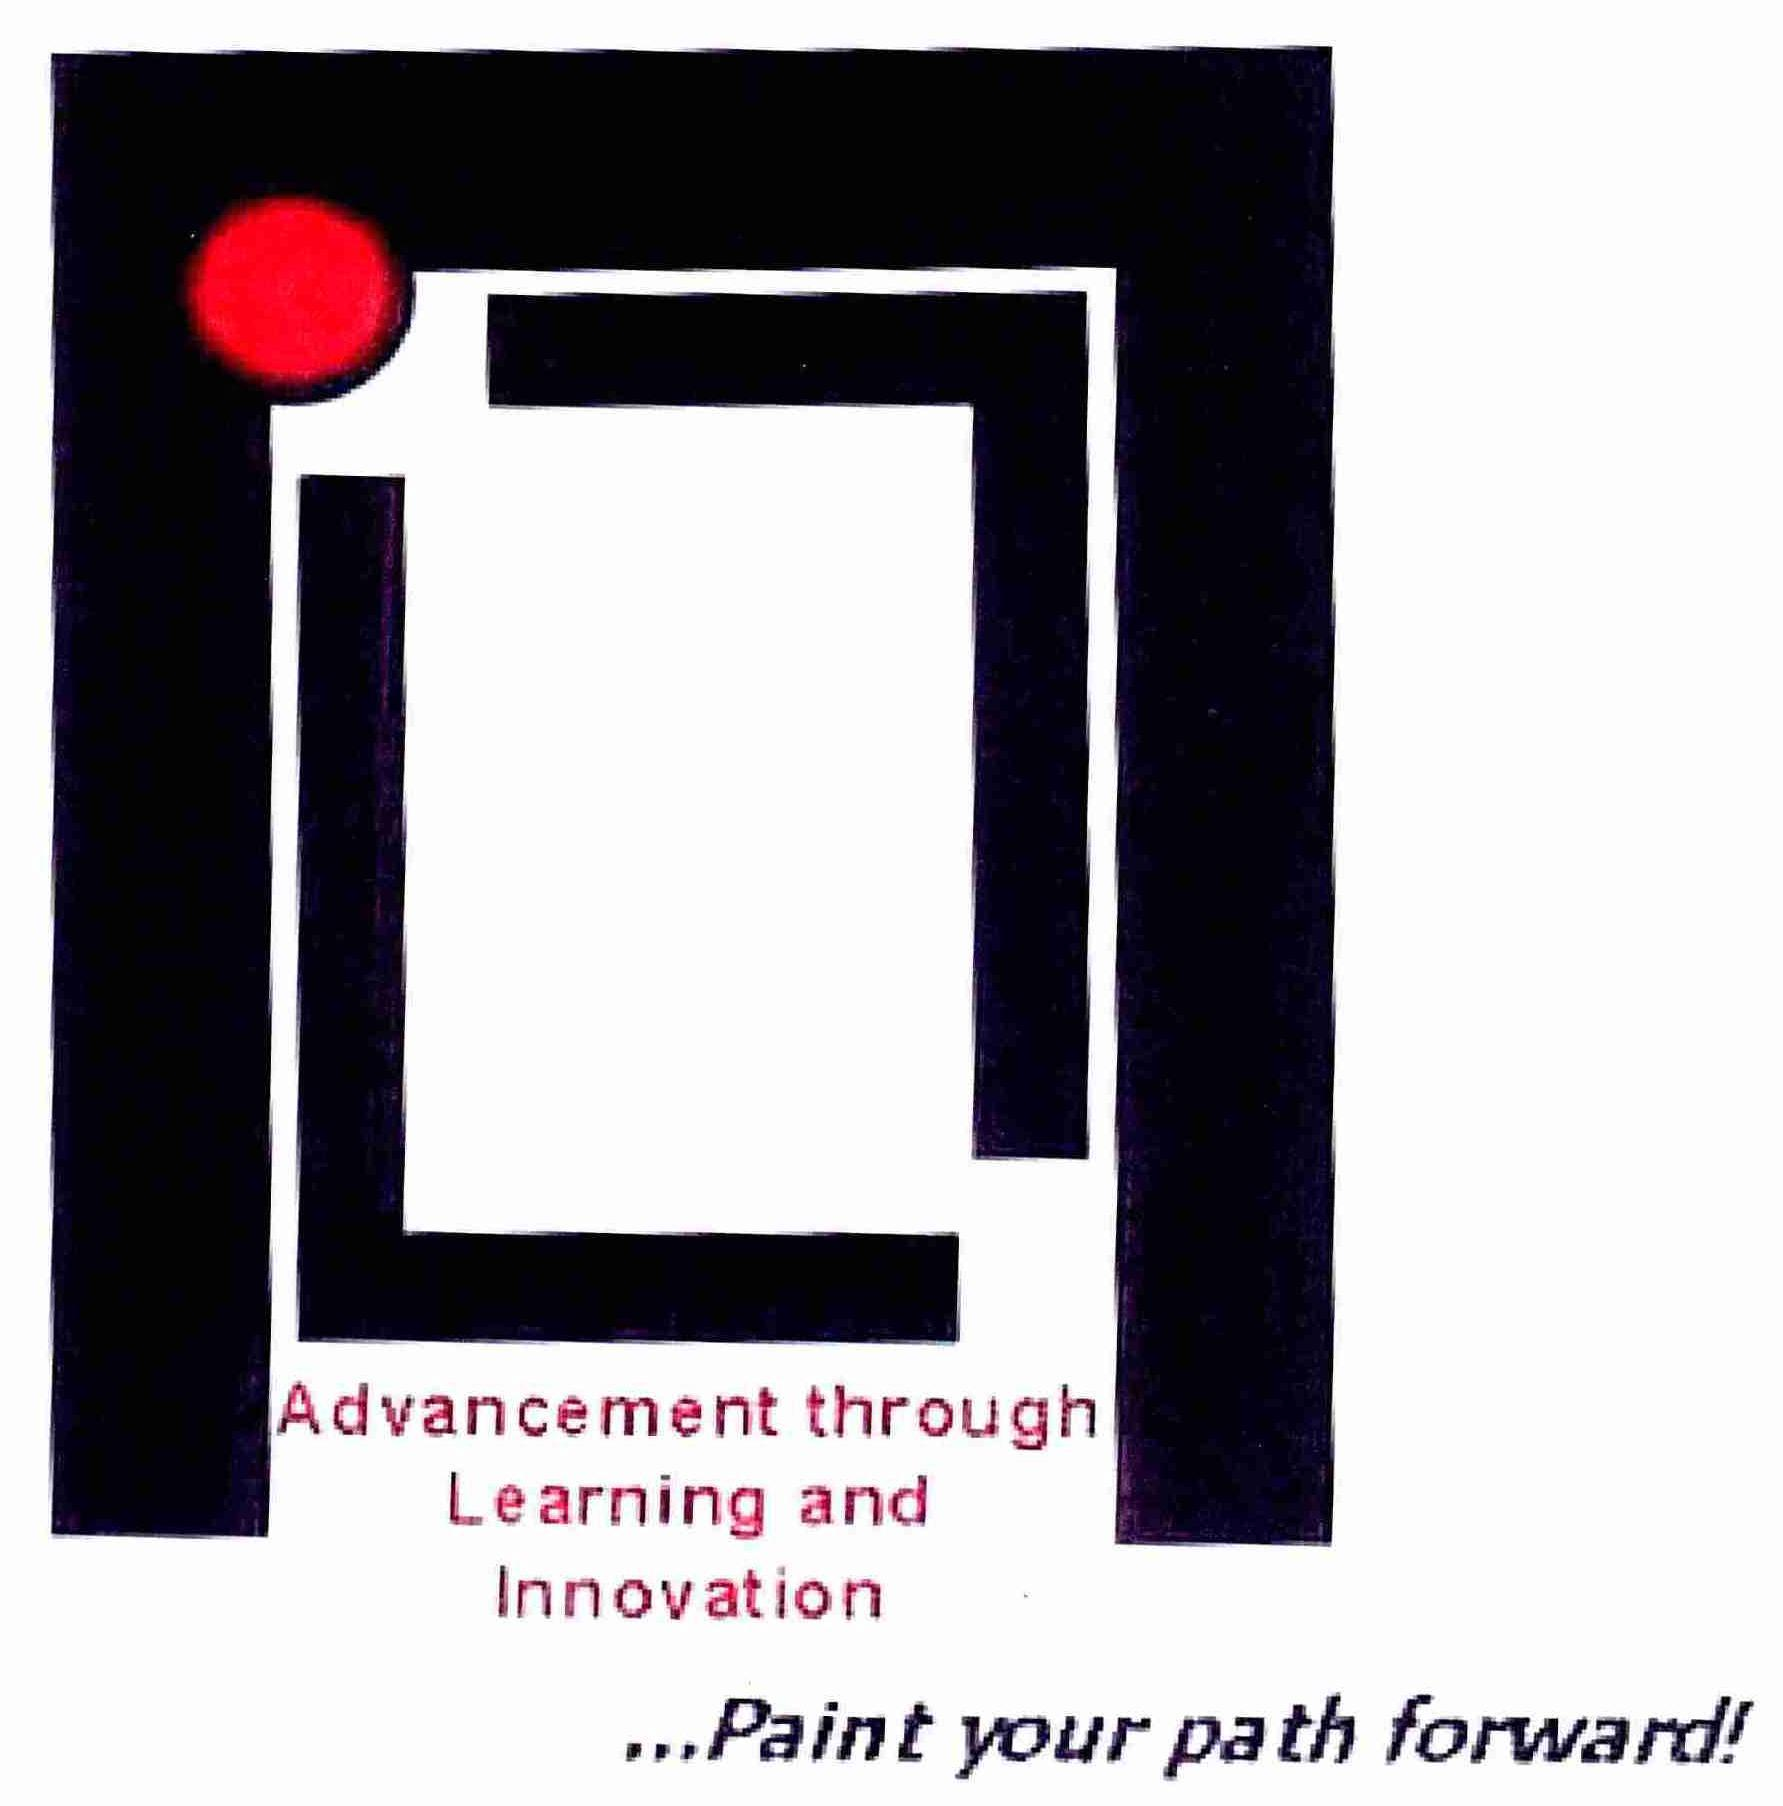  ADVANCEMENT THROUGH LEARNING AND INNOVATION ...PAINT YOUR PATH FORWARD!